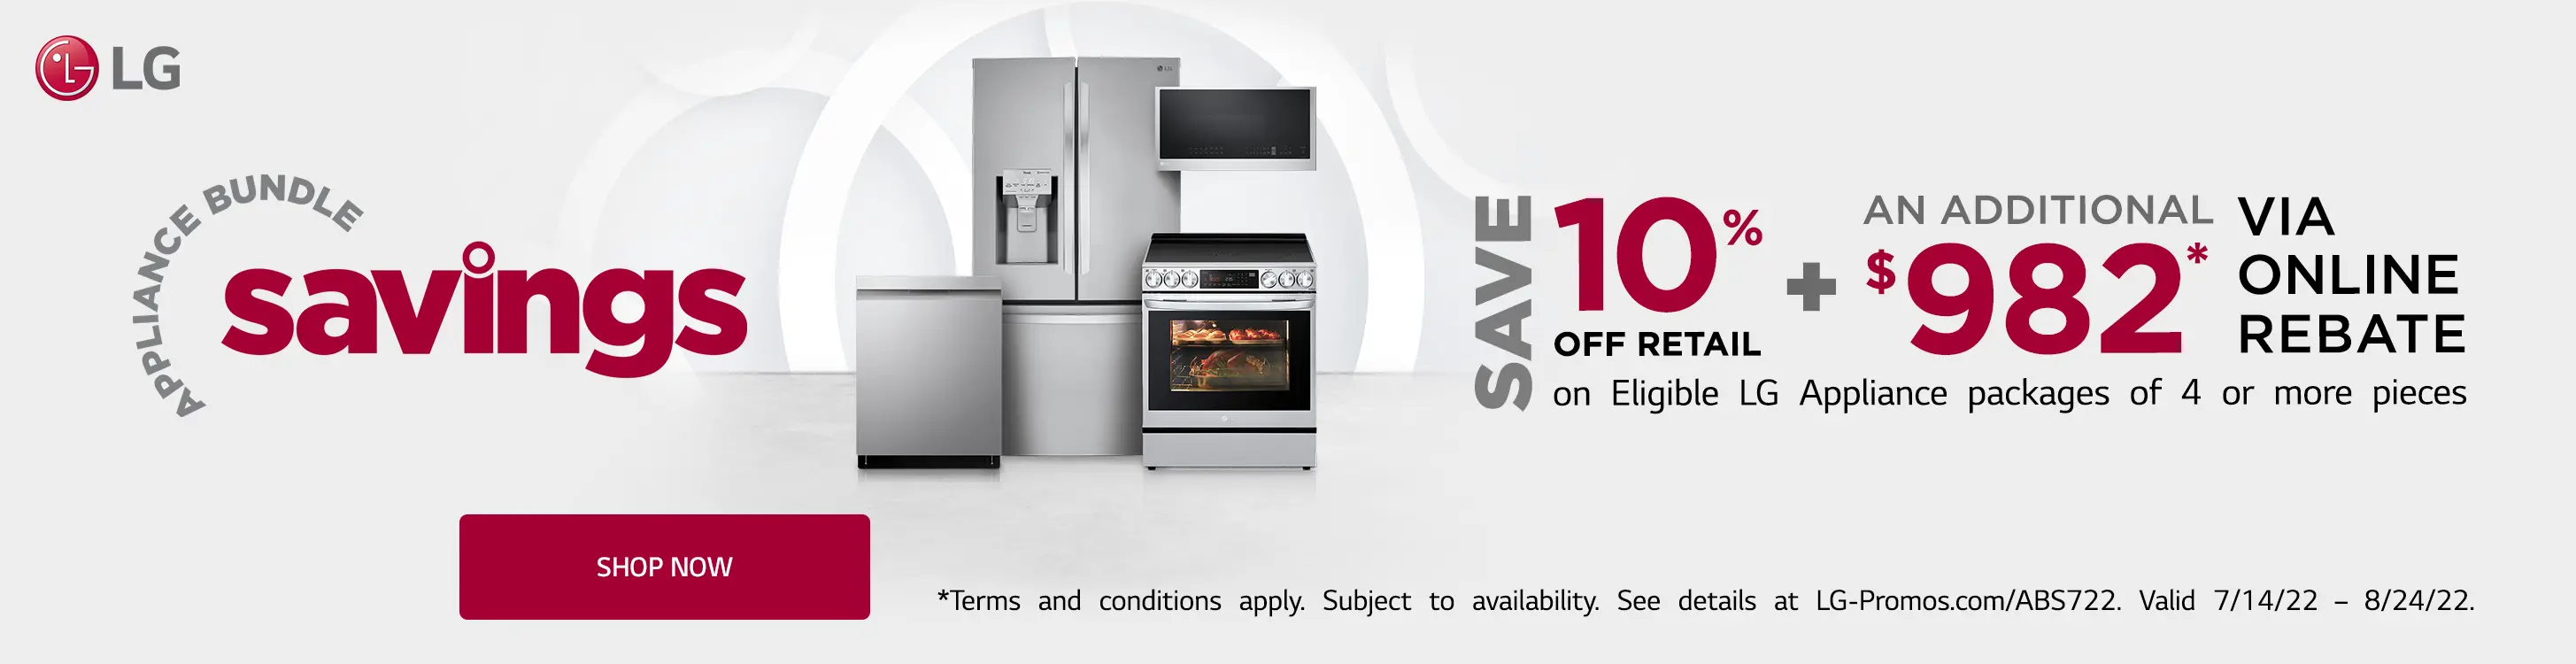 Save 10% off retail plus an additional $982 via online rebate on eligible LG appliance packages.